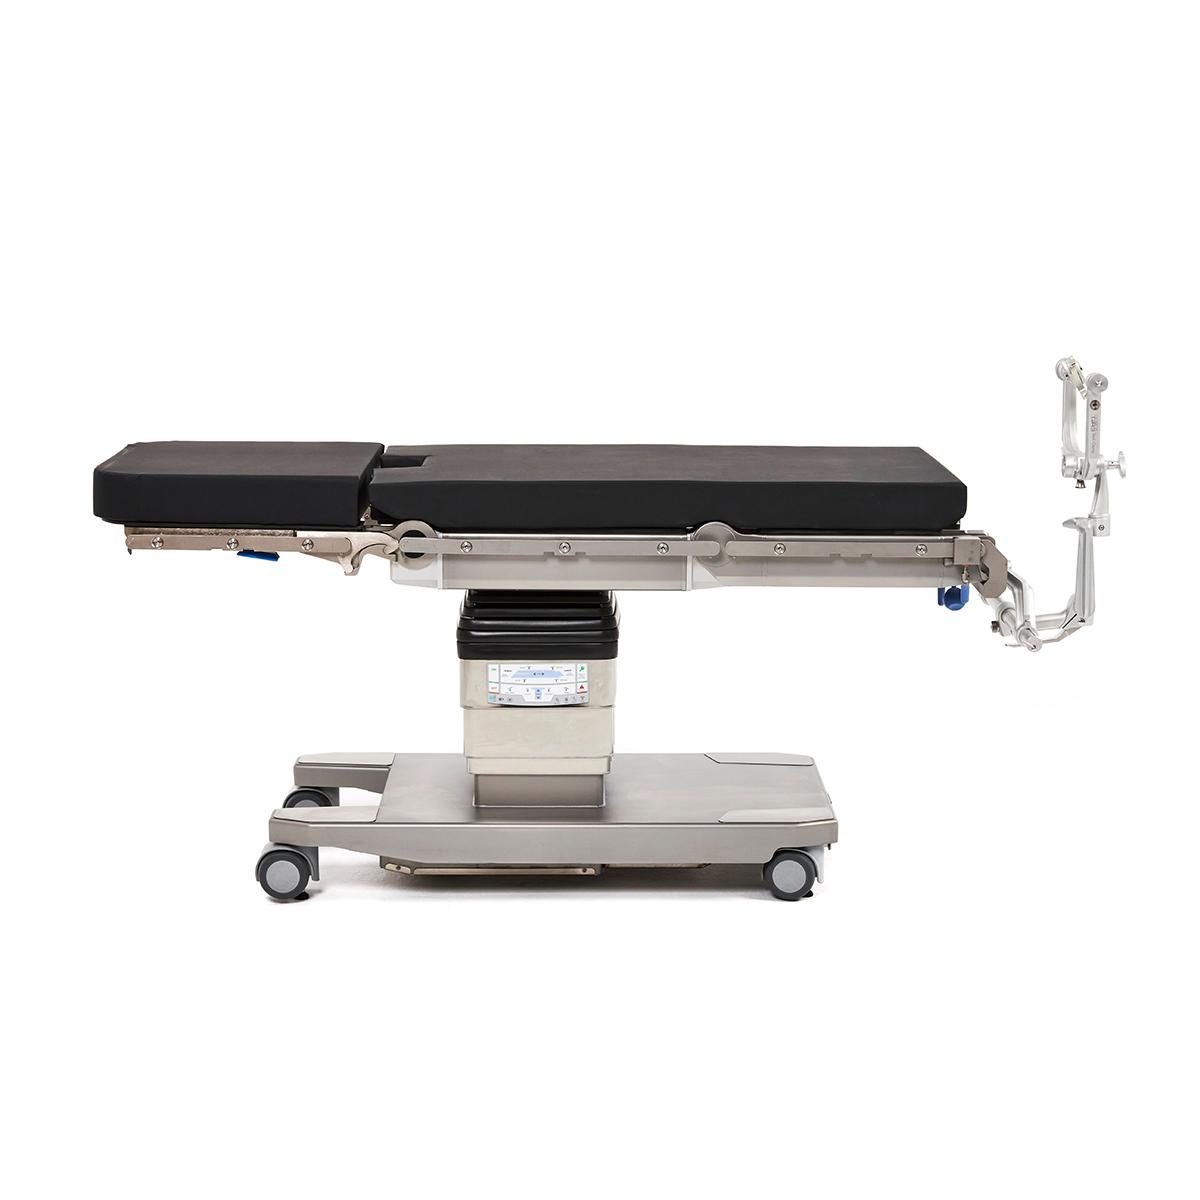 Surgical table with neuro non-radiolucent accessory package components to secure patient’s head.